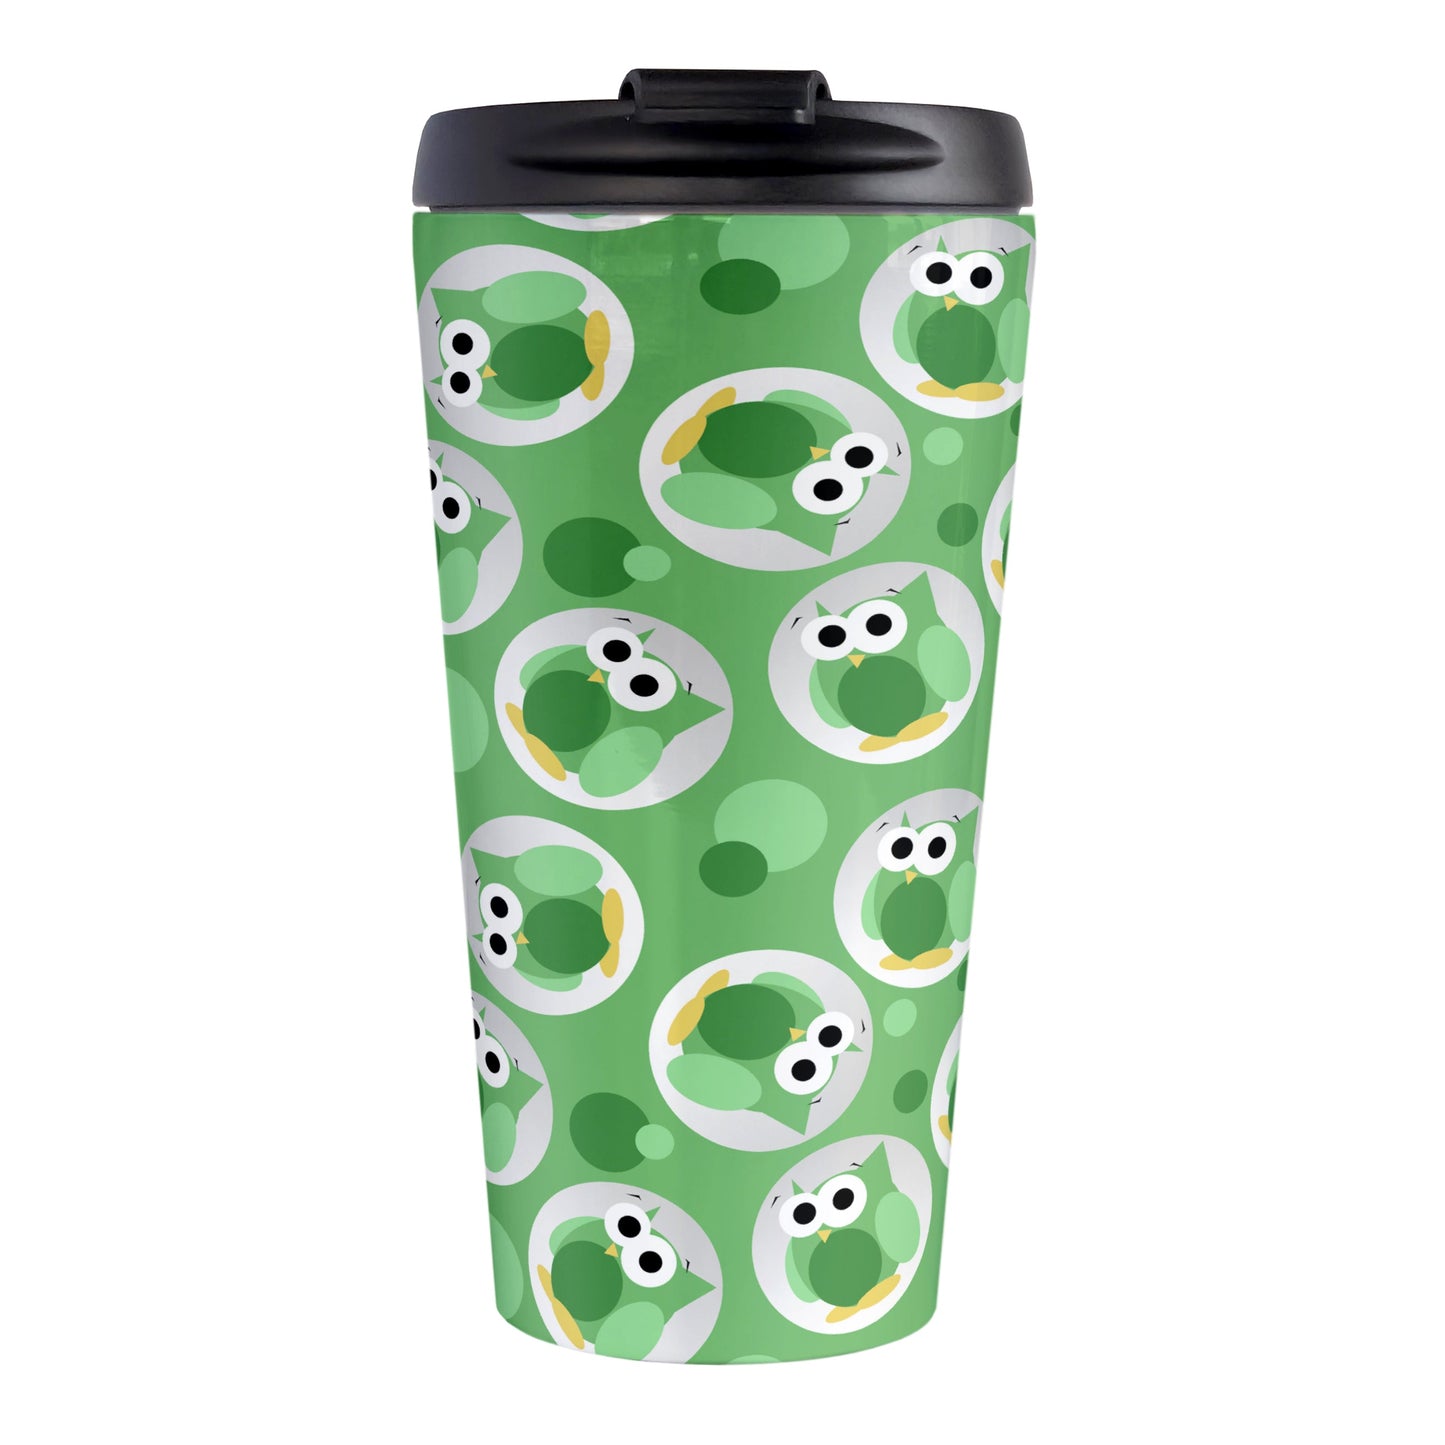 Funny Cute Green Owl Pattern Travel Mug (15oz, stainless steel insulated) at Amy's Coffee Mugs